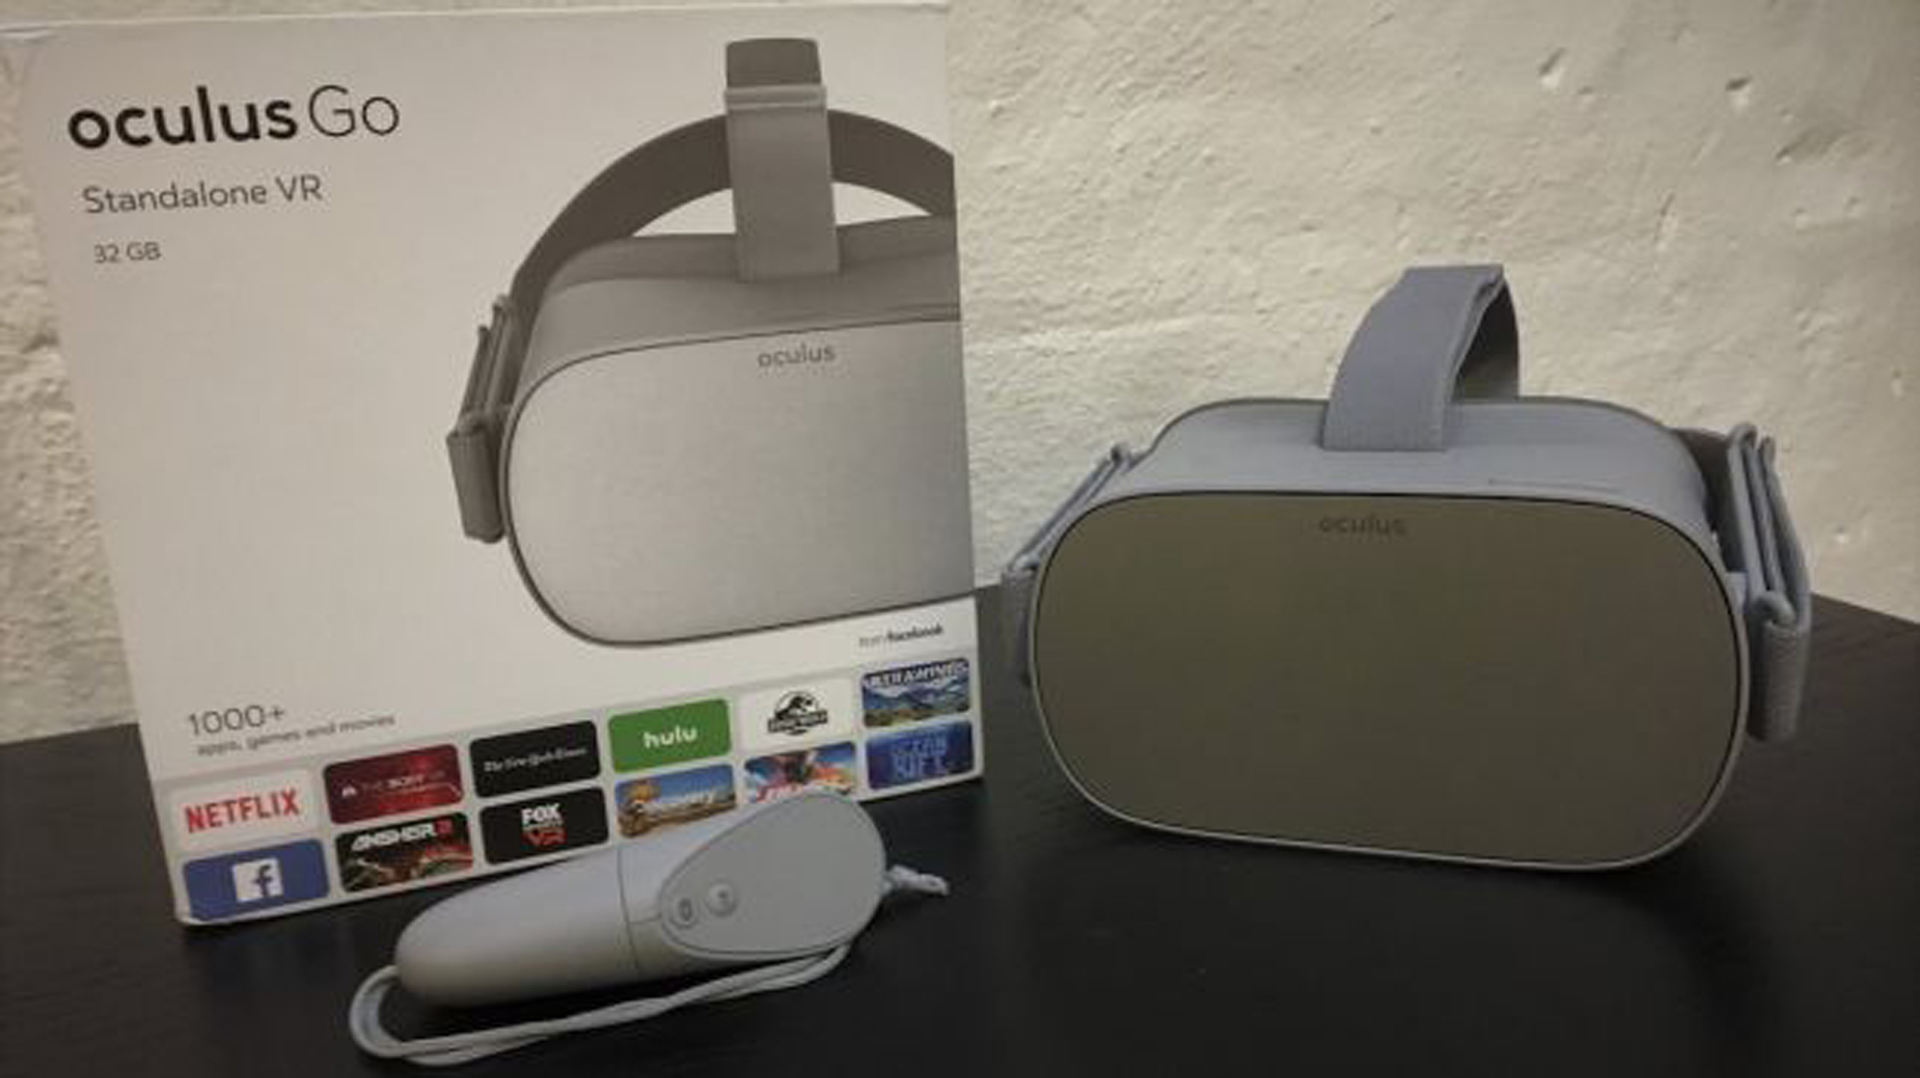 oculus go all in one 32gb